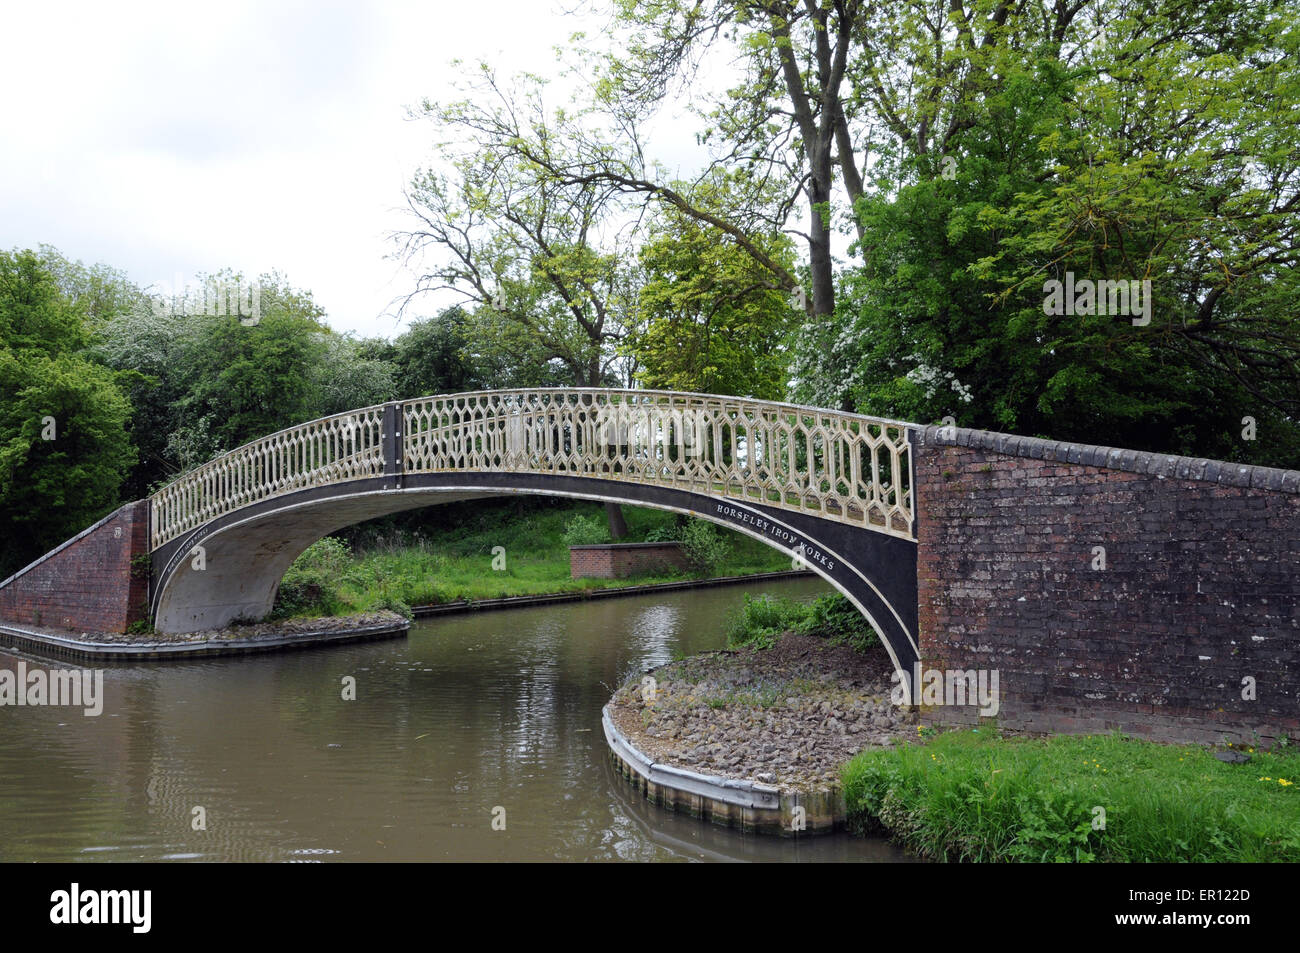 An iron bridge, originally made by the Horseley Iron Works across the Oxford Canal near Rugby the Oxford in the East Midlands. Stock Photo